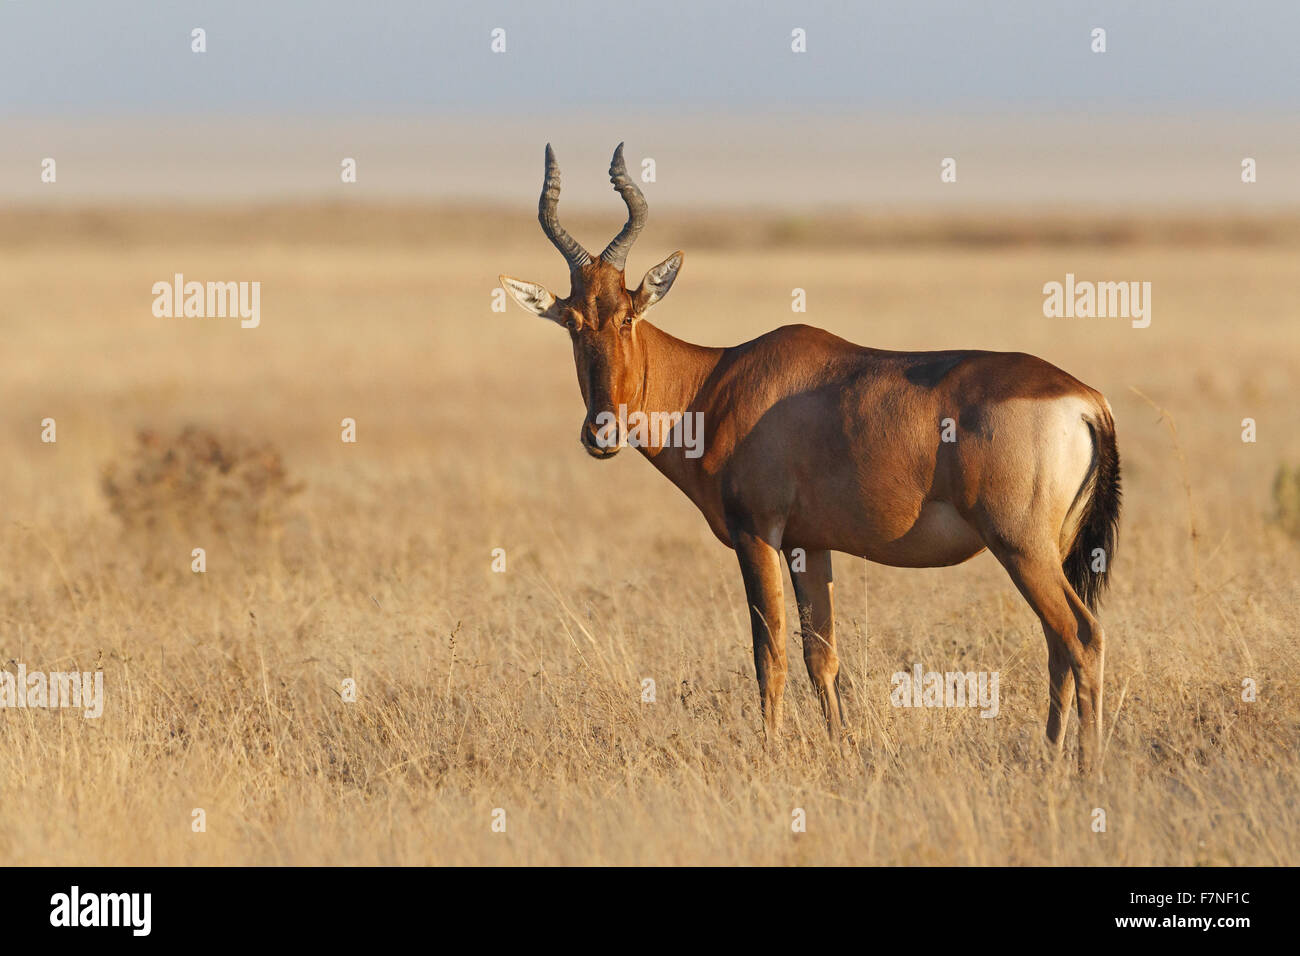 Red hartebeest (Alcelaphus buselaphus caama) standing in dry grass in Etosha National Park, Namibia Stock Photo